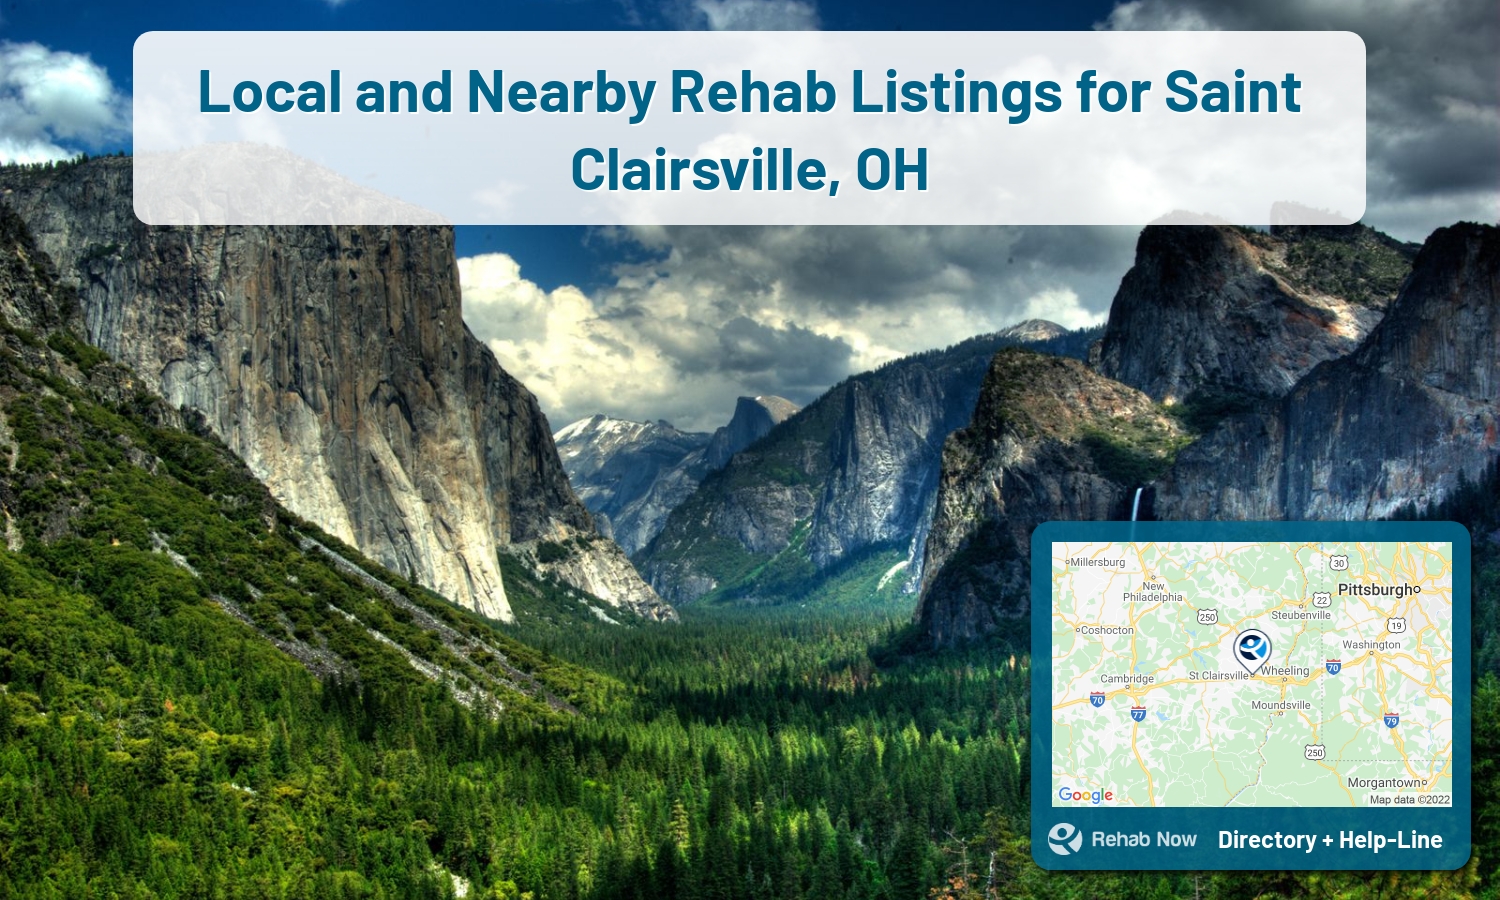 Our experts can help you find treatment now in Saint Clairsville, Ohio. We list drug rehab and alcohol centers in Ohio.